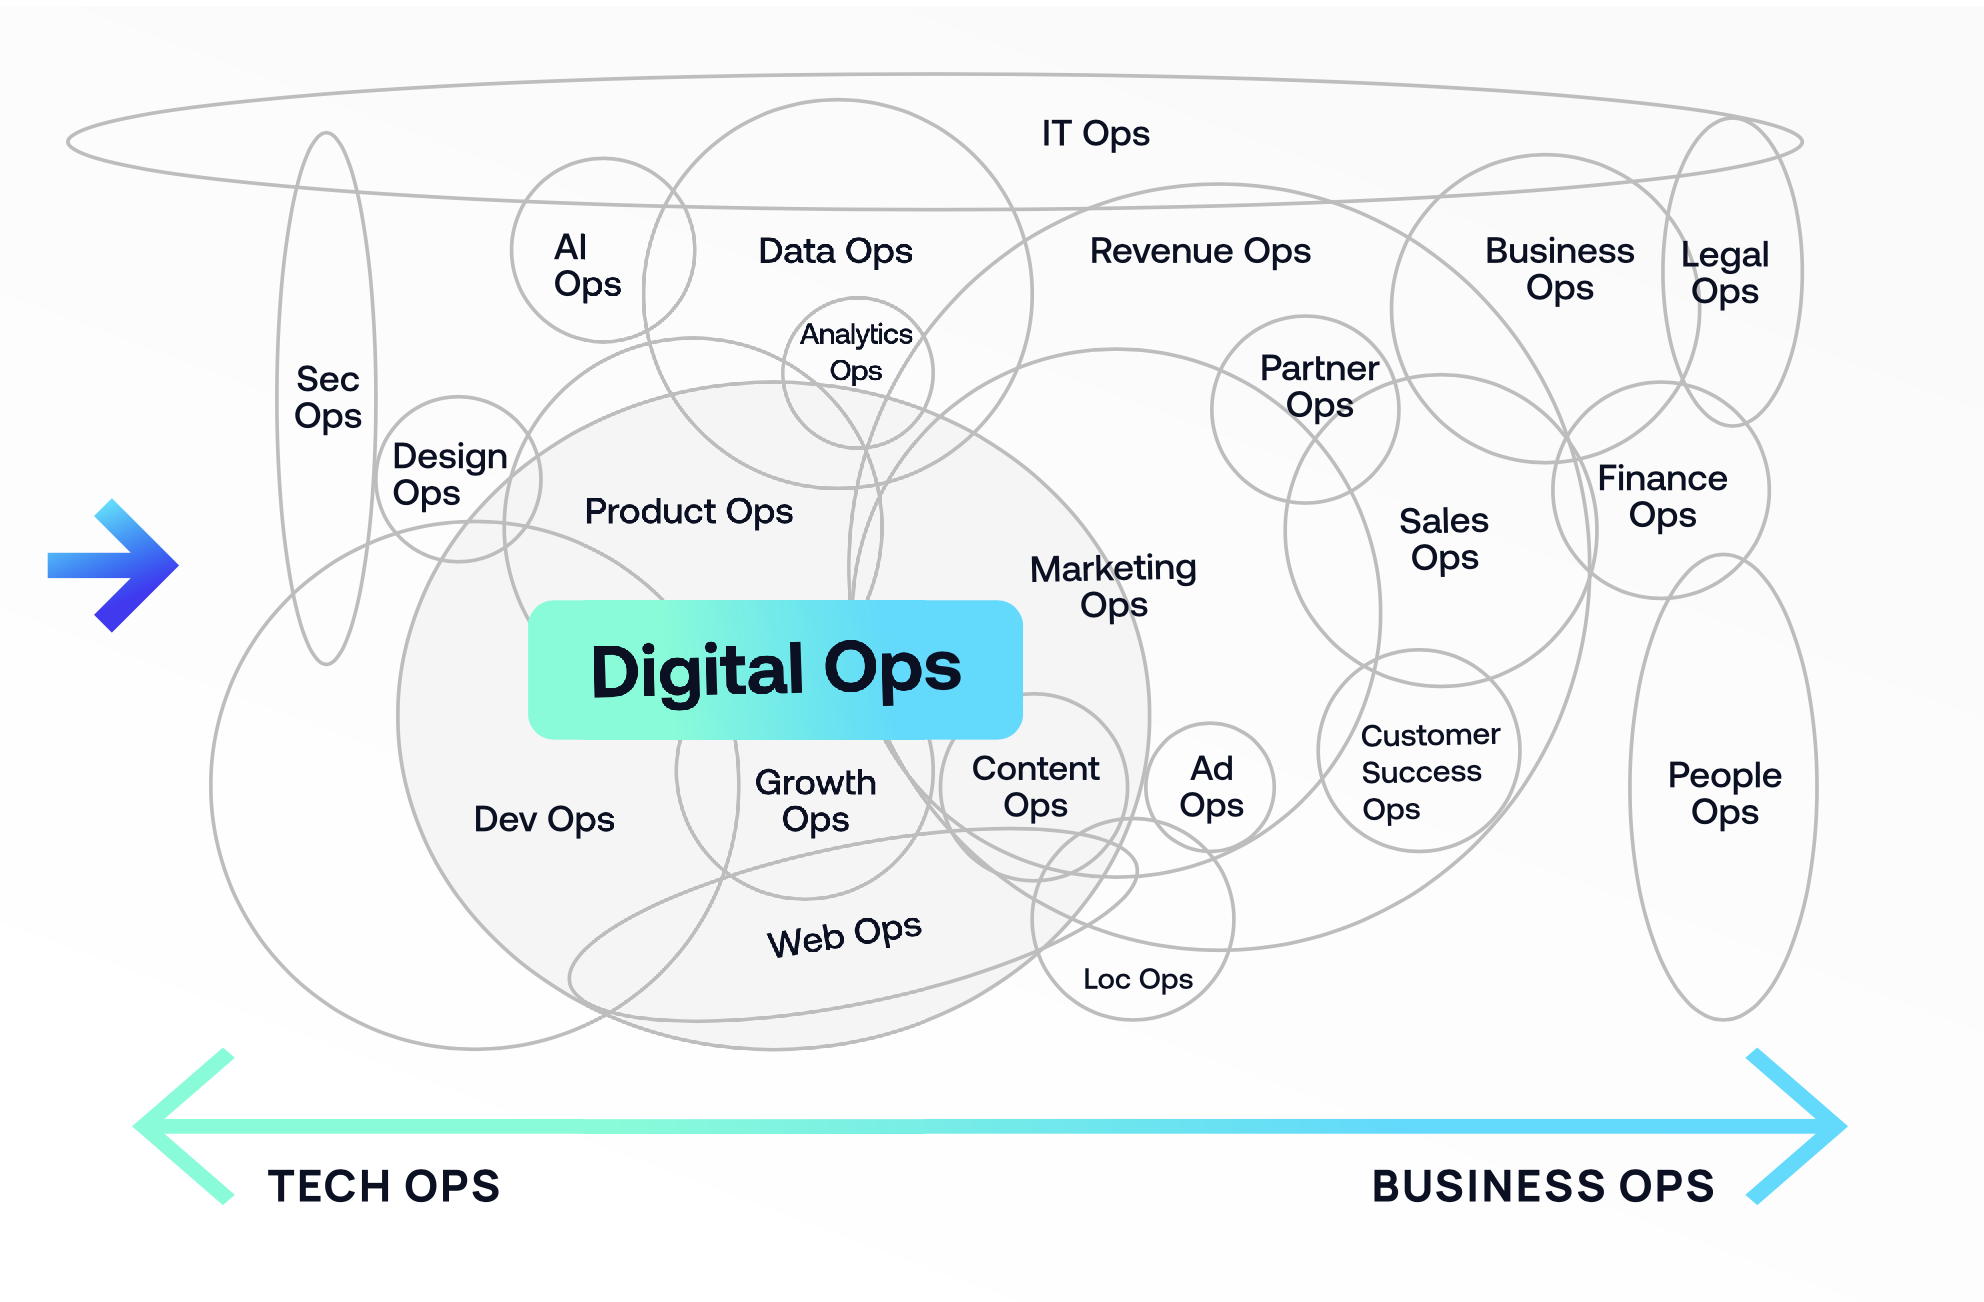 Where Digital Ops sits within a business and which teams are involved